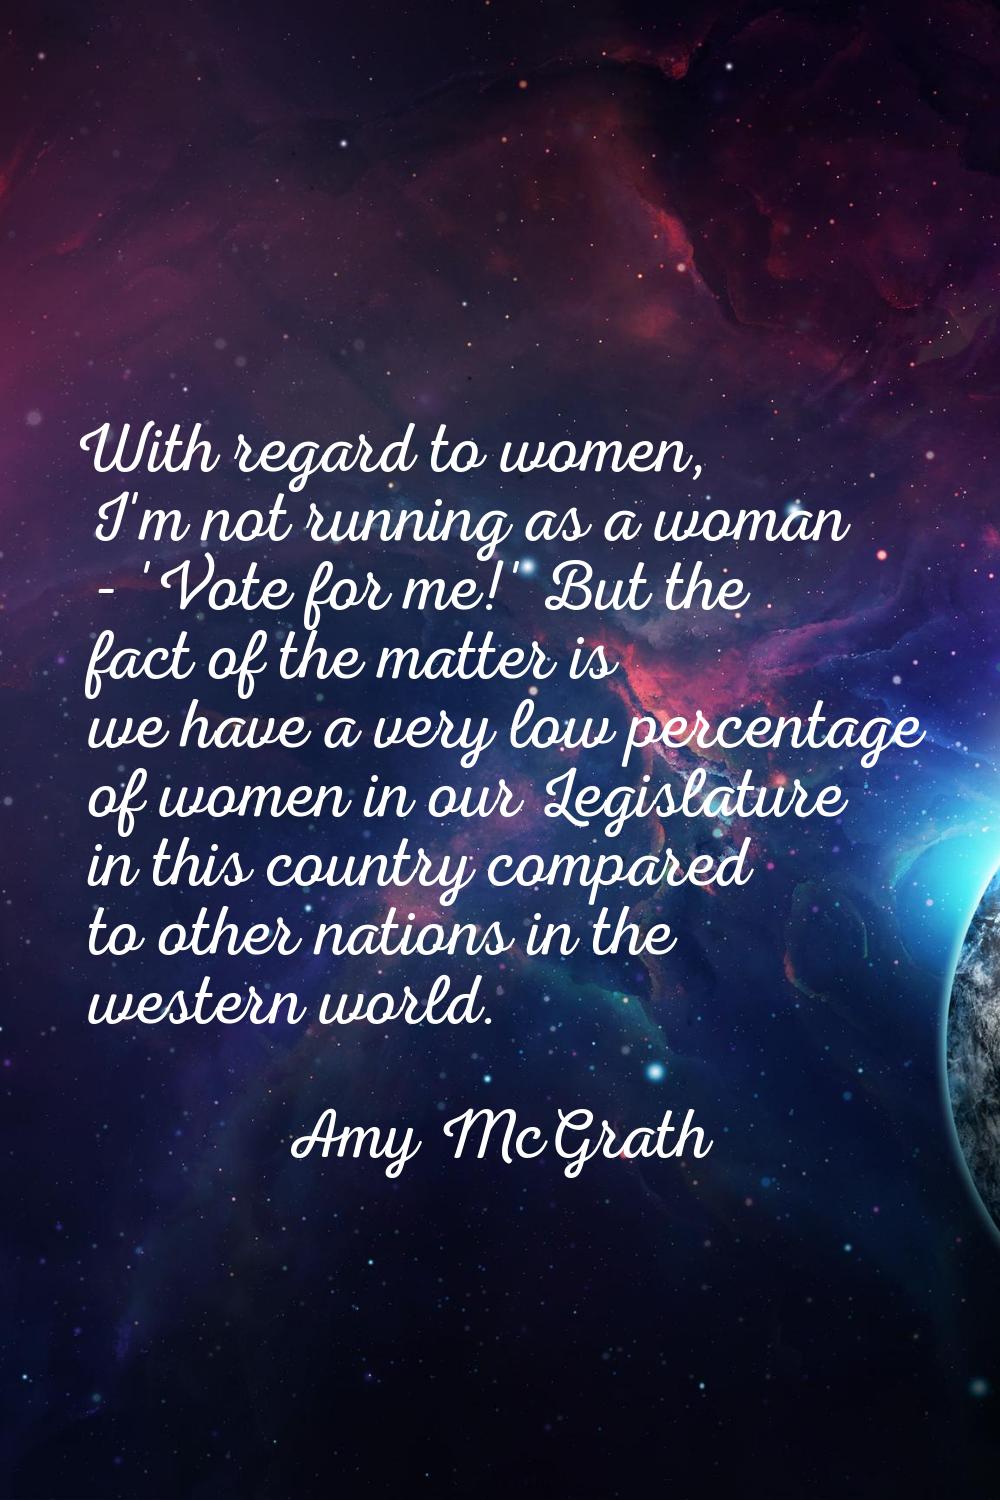 With regard to women, I'm not running as a woman - 'Vote for me!' But the fact of the matter is we 